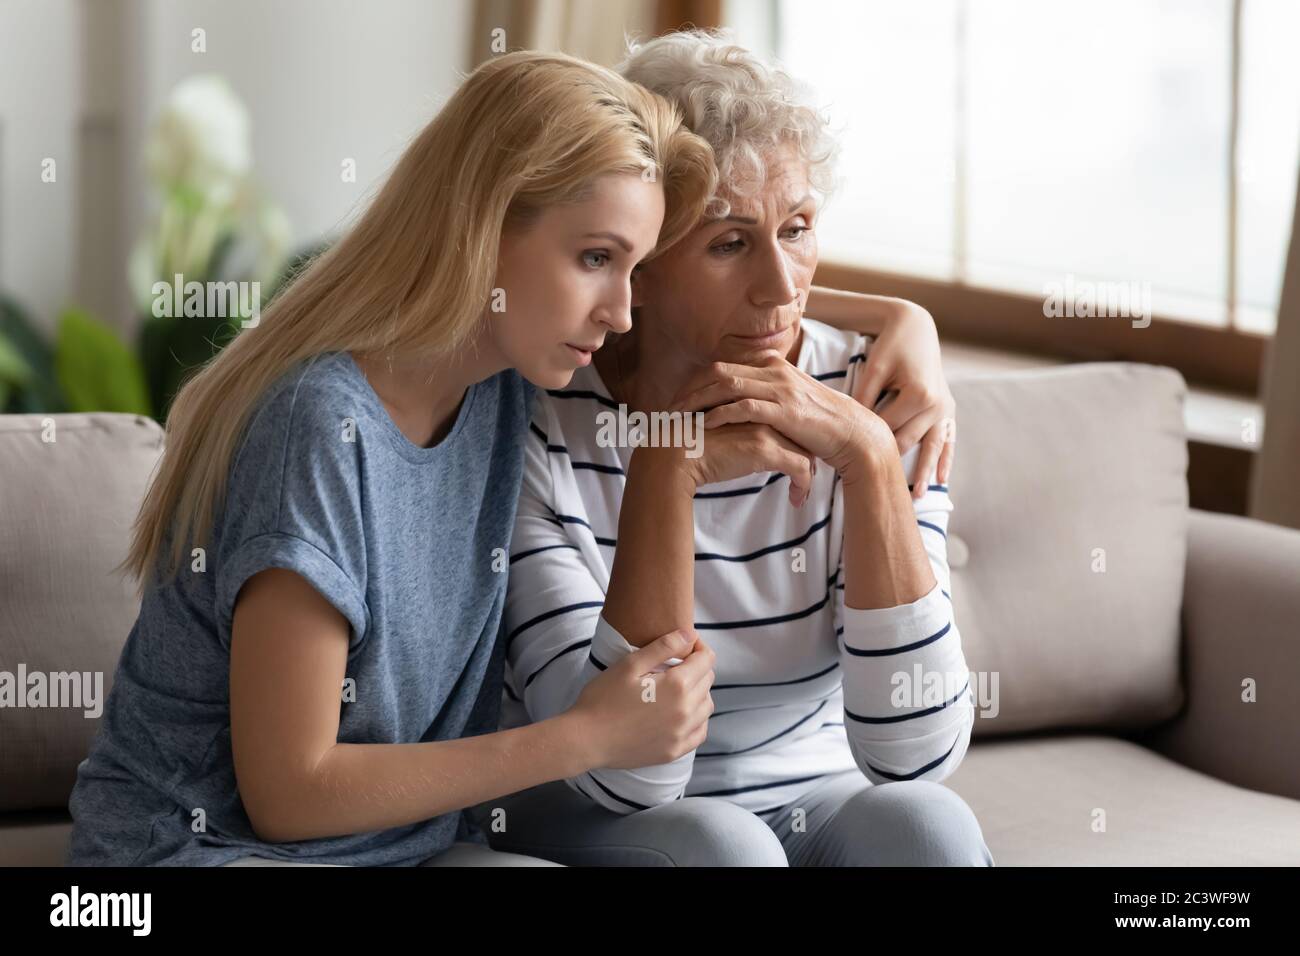 Grownup adult daughter soothes elderly mother shares her mental pain Stock Photo